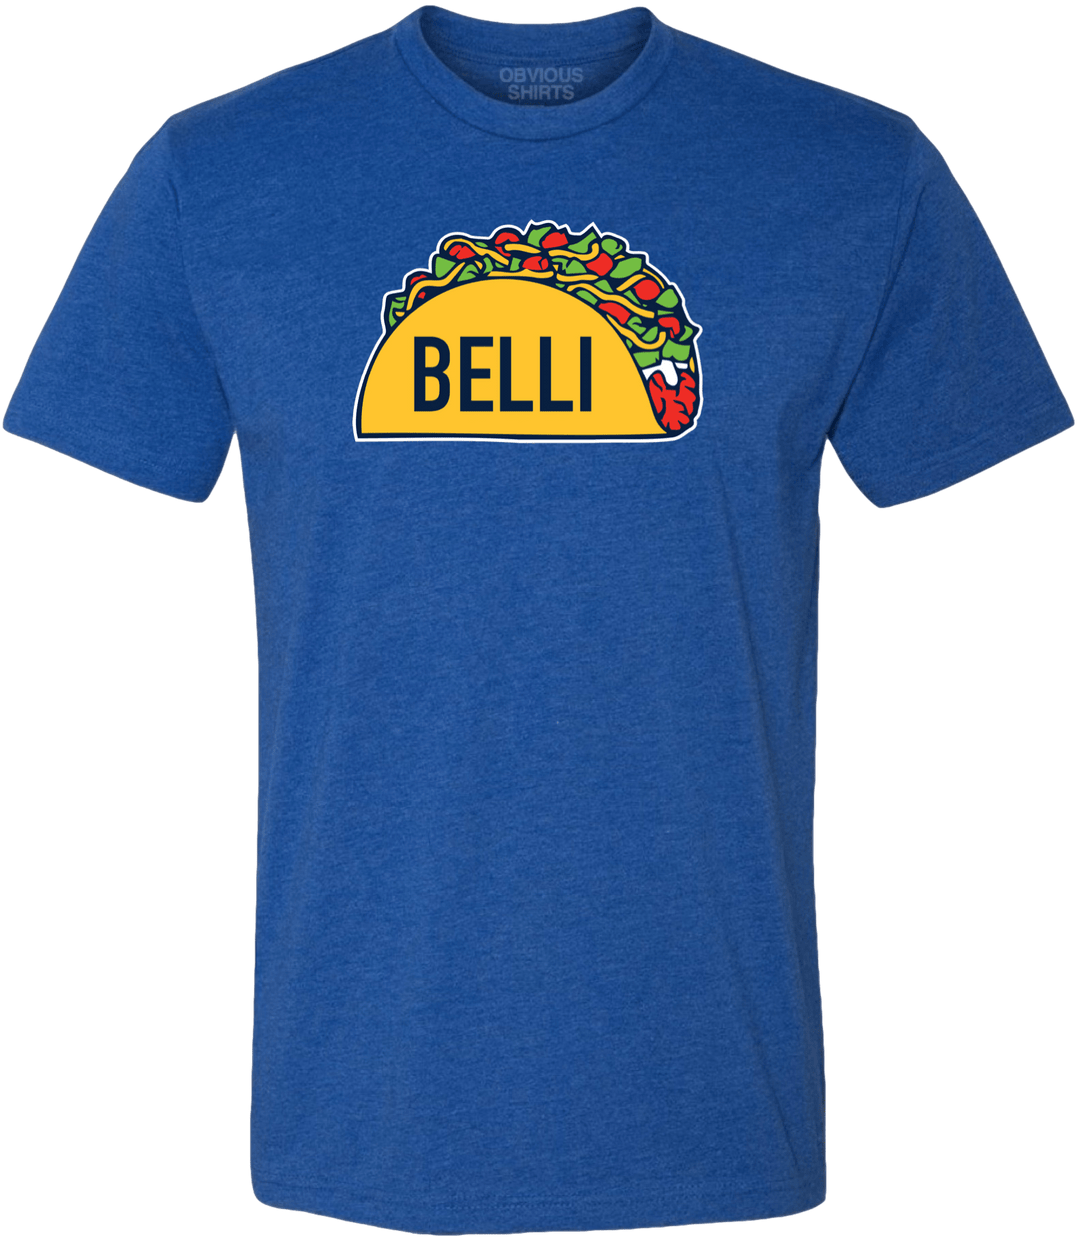 TACO BELLI. - OBVIOUS SHIRTS